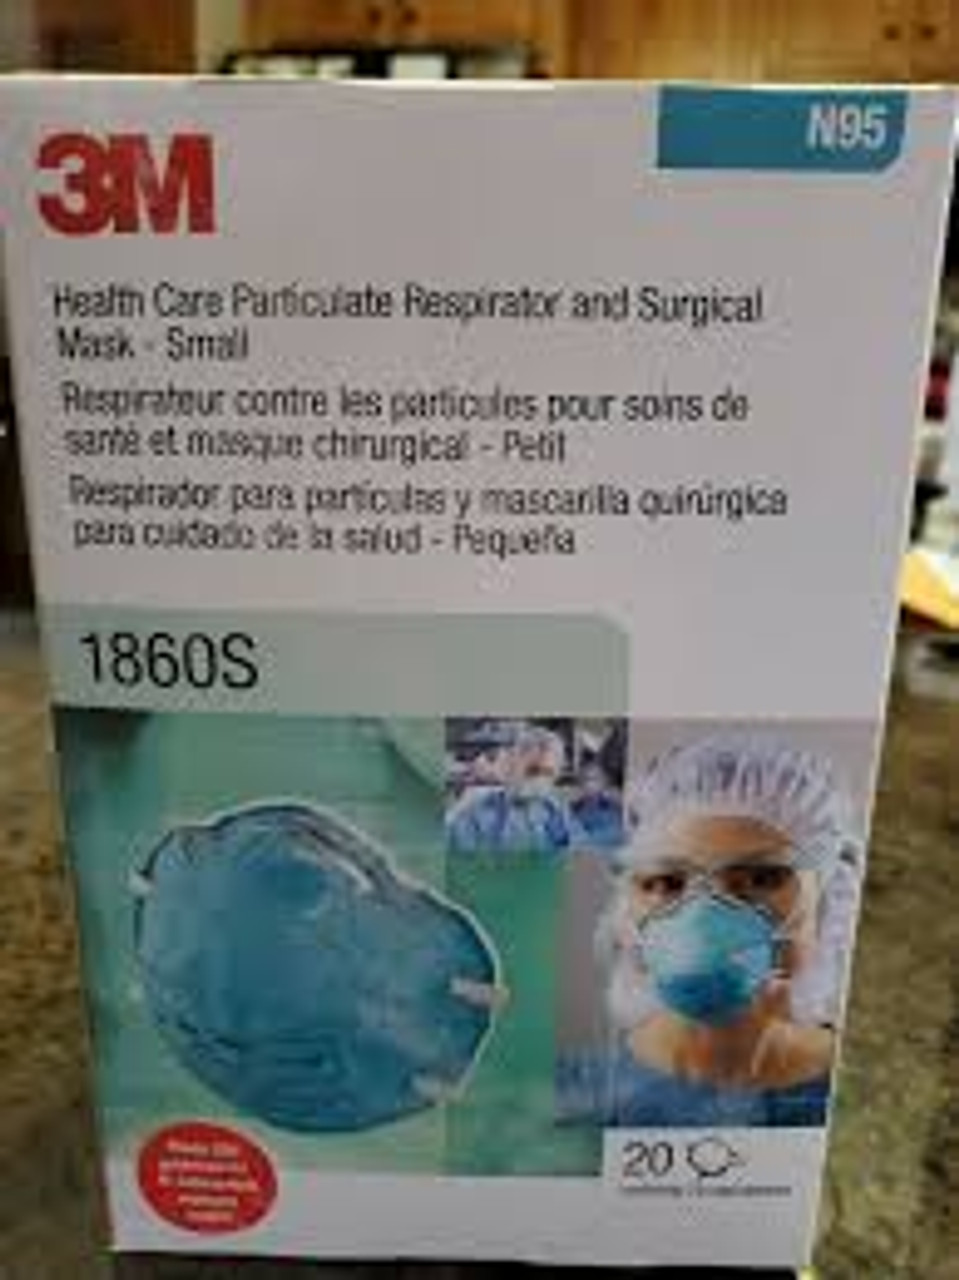 3M Particulate Respirator / Surgical Mask 1860